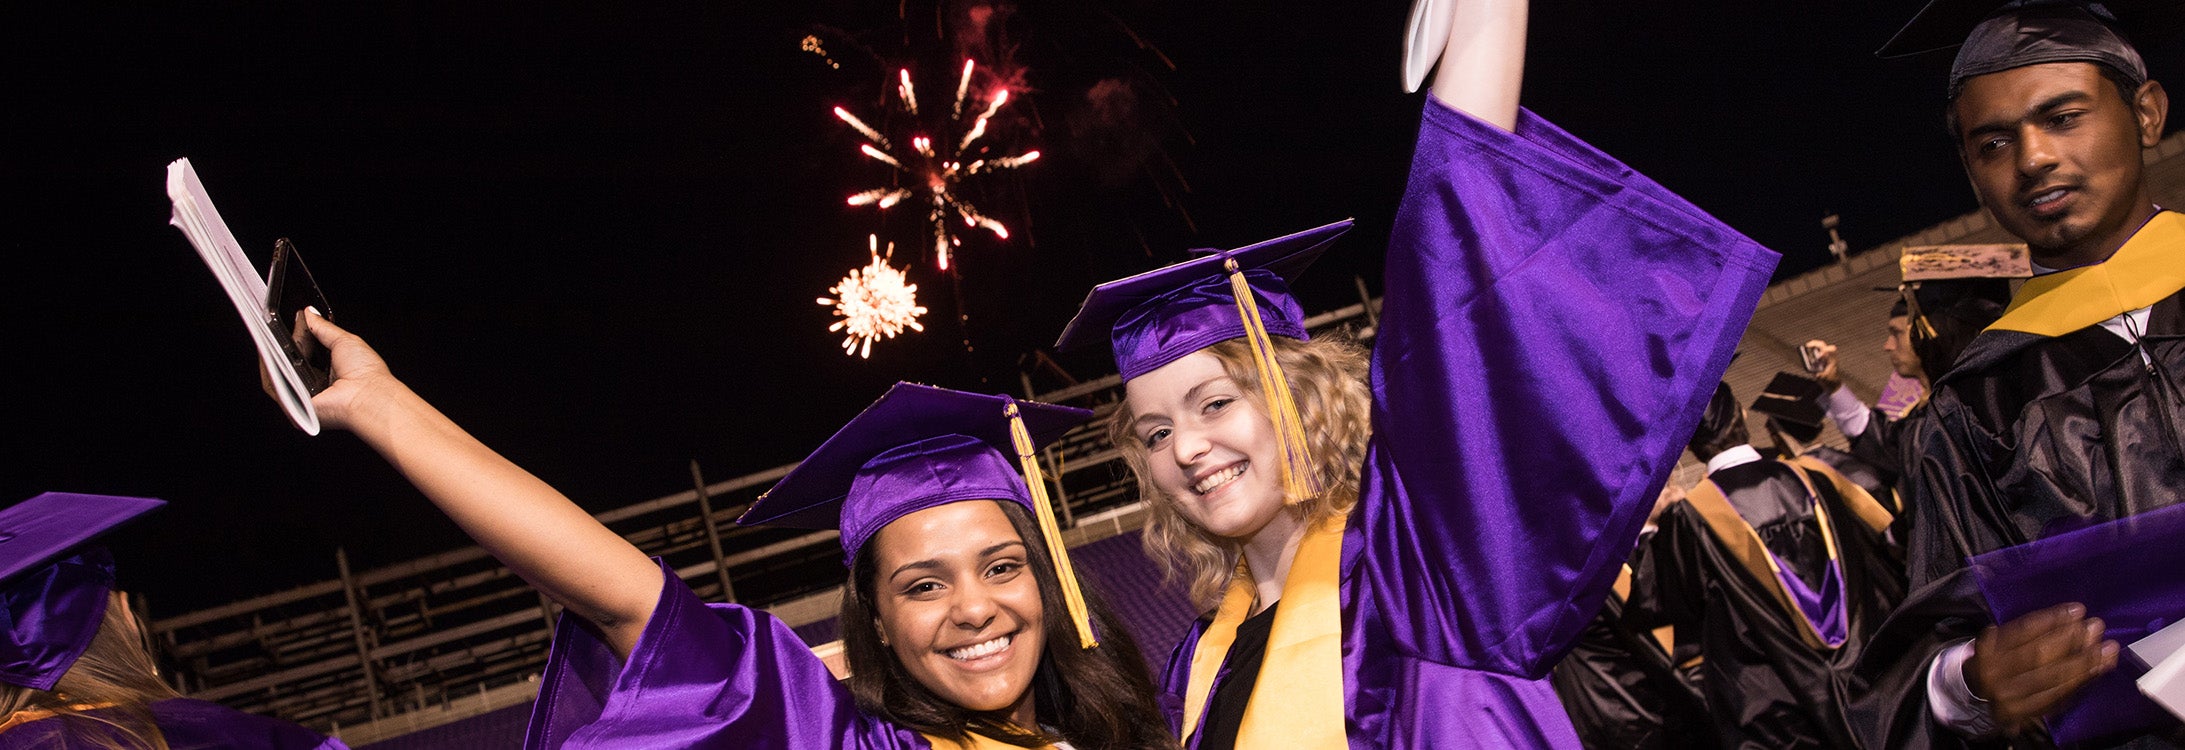 ECU students celebrate under the fireworks at commencement.